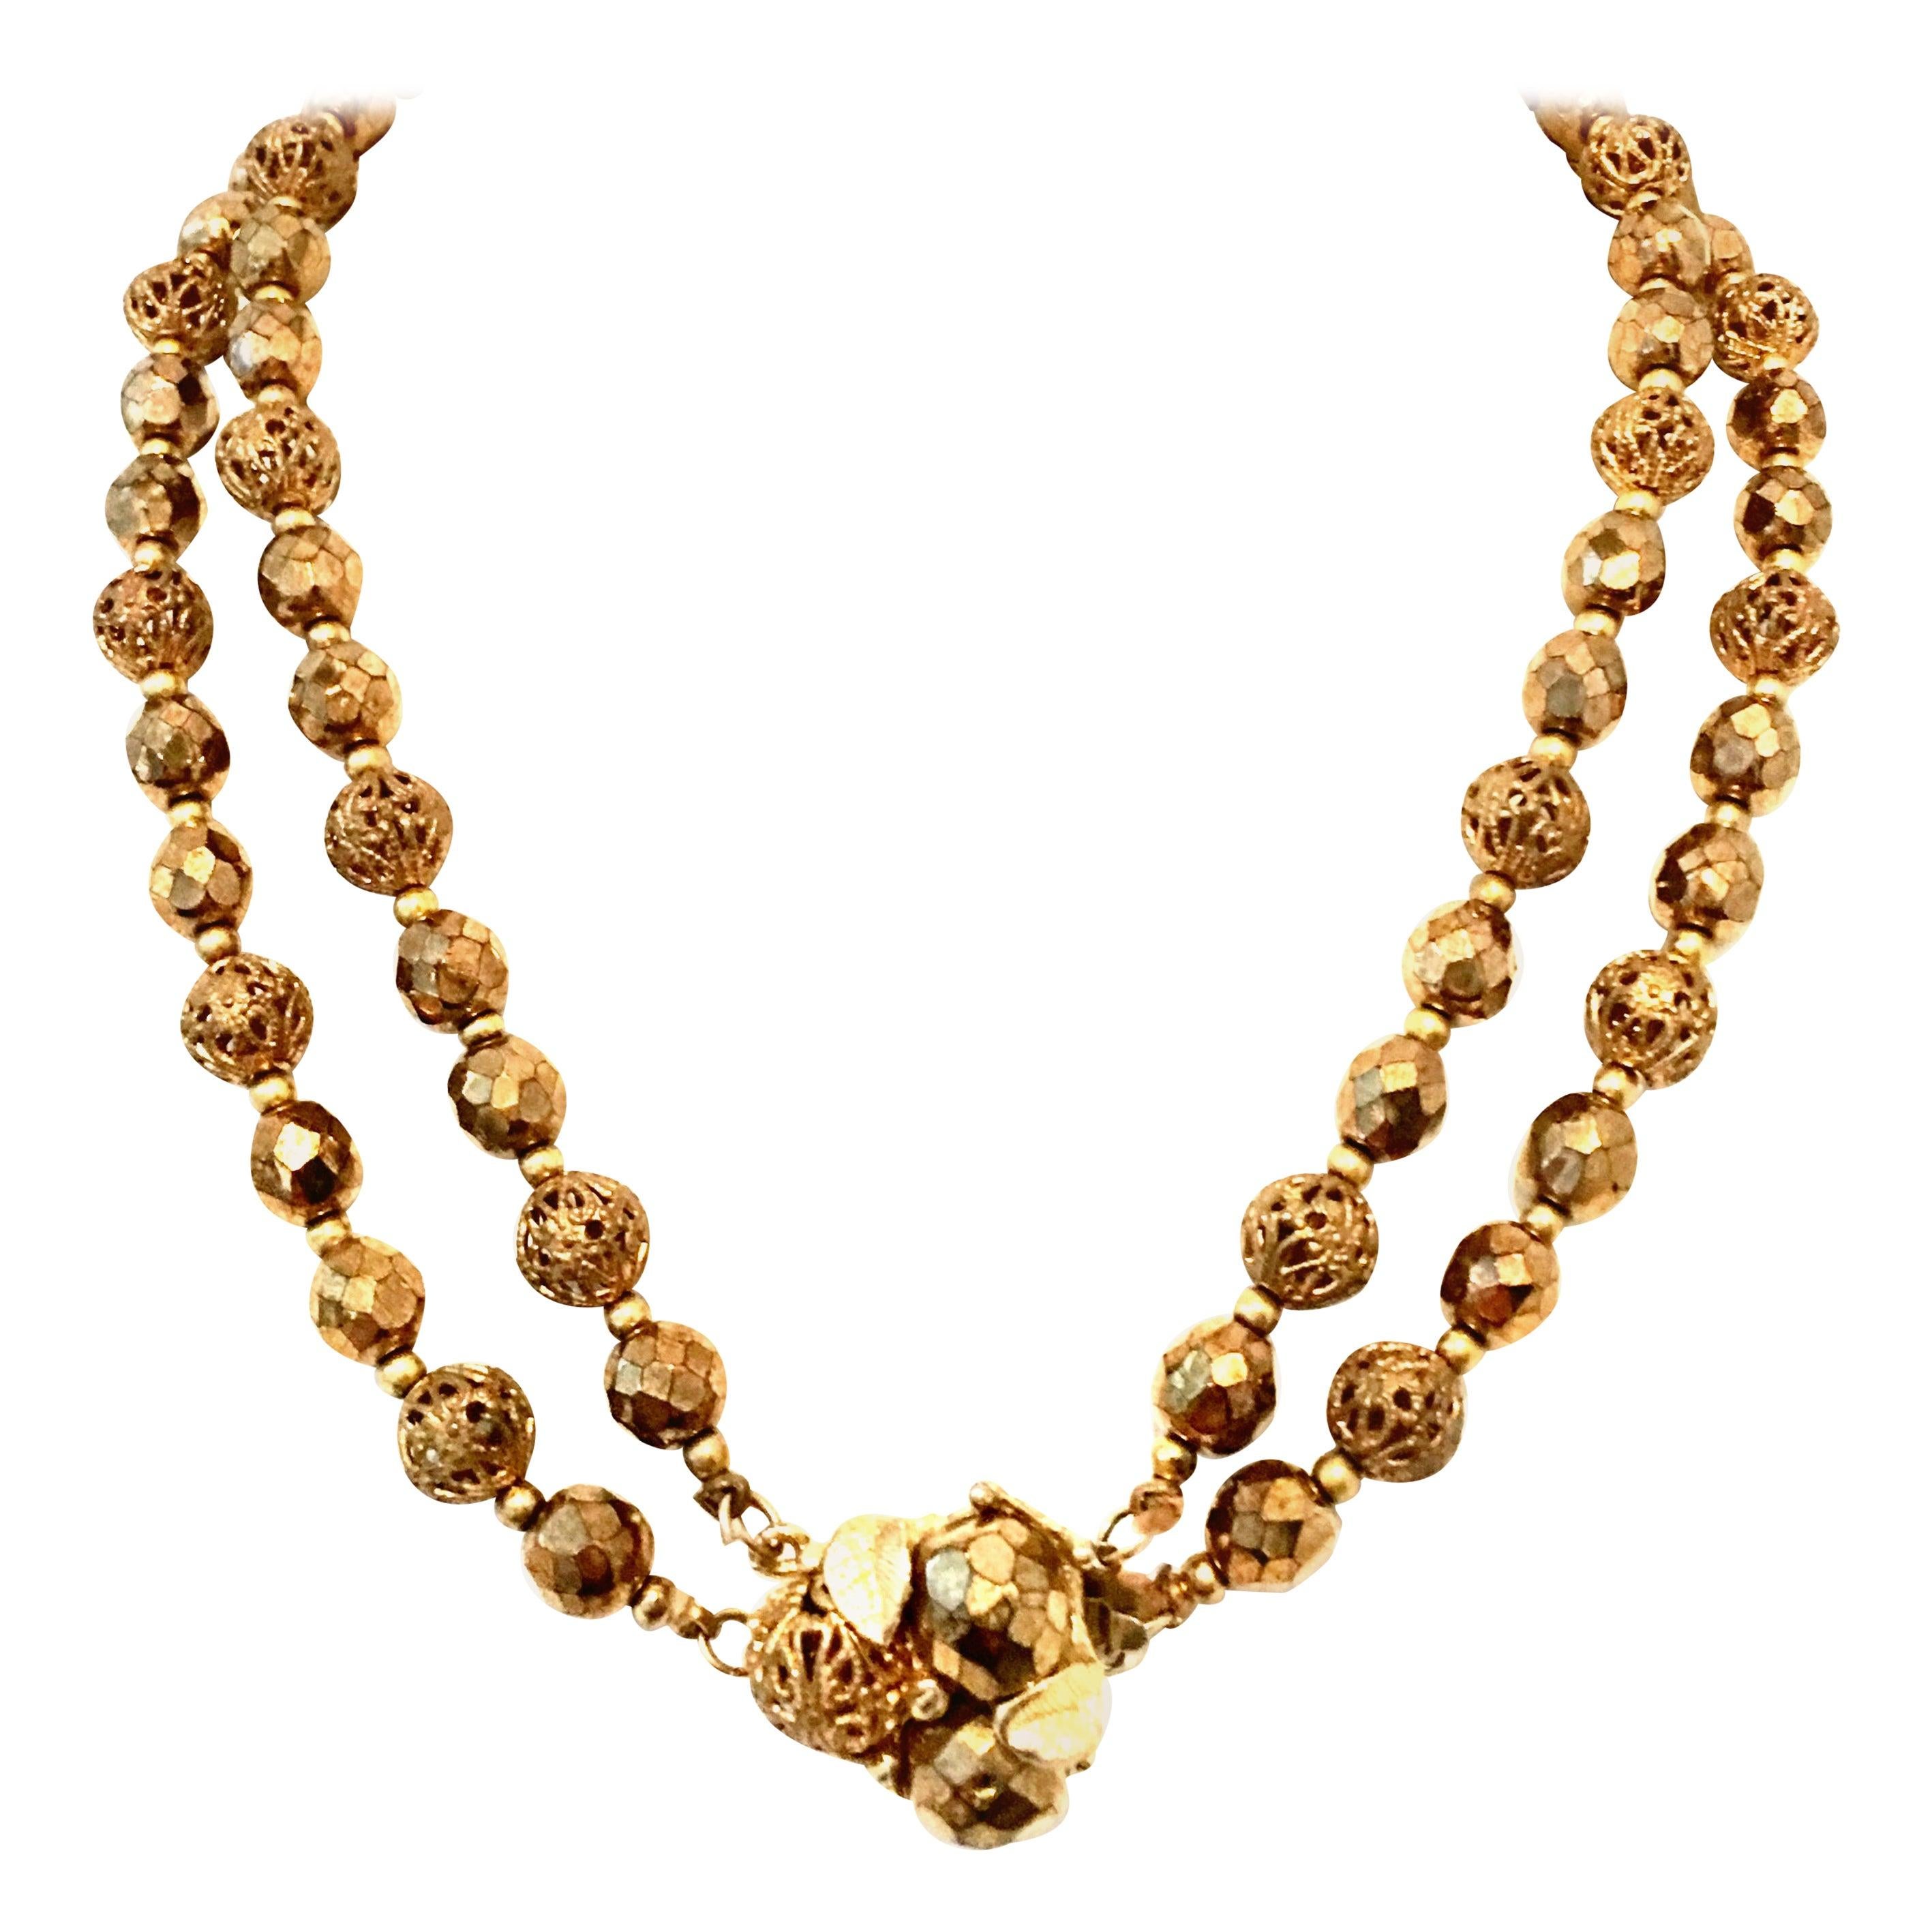 Mid-20th Century Gold Bead Double Strand Choker Necklace For Sale